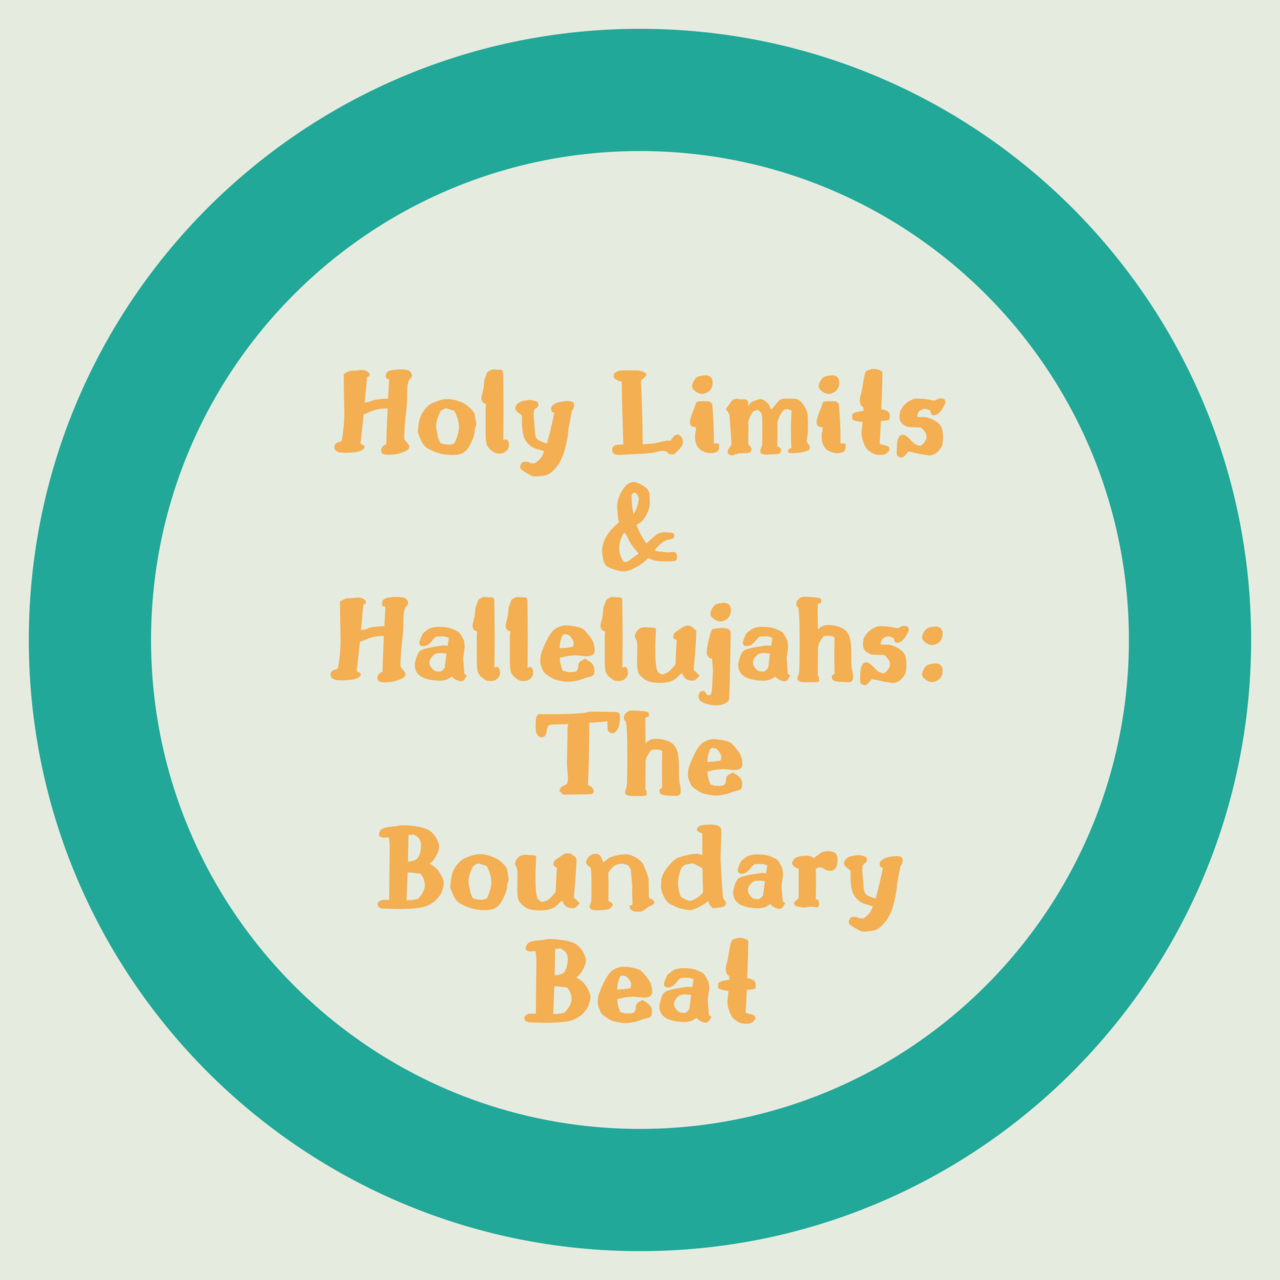 Holy Limits & Hallelujahs: The Boundary Beat